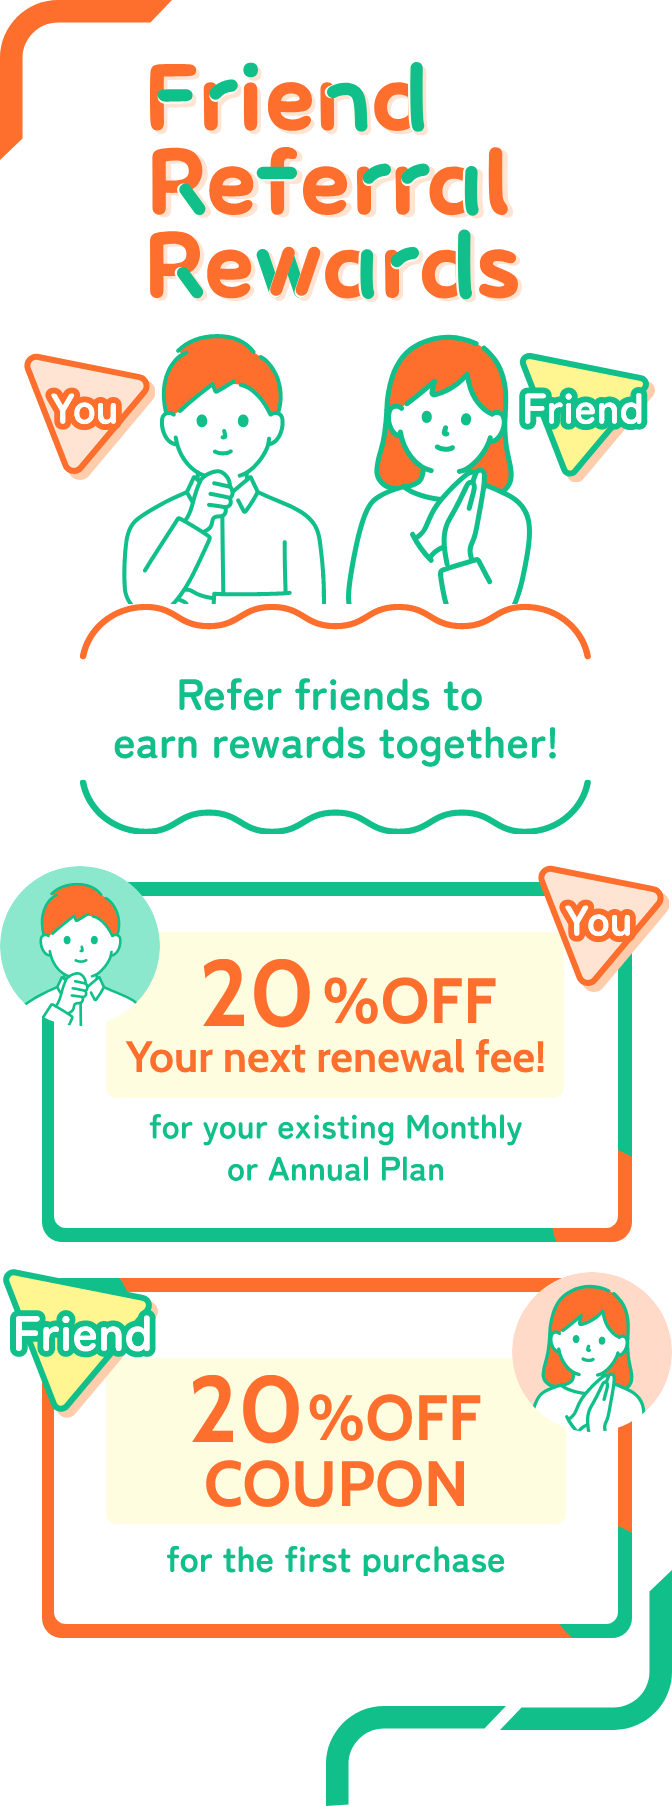 Refer friends to earn rewards together! When you send a Referral Discount Coupon to your friends, they can make a purchase at 20% off, and you will also automatically receive a 20% discount on your next renewal fee.